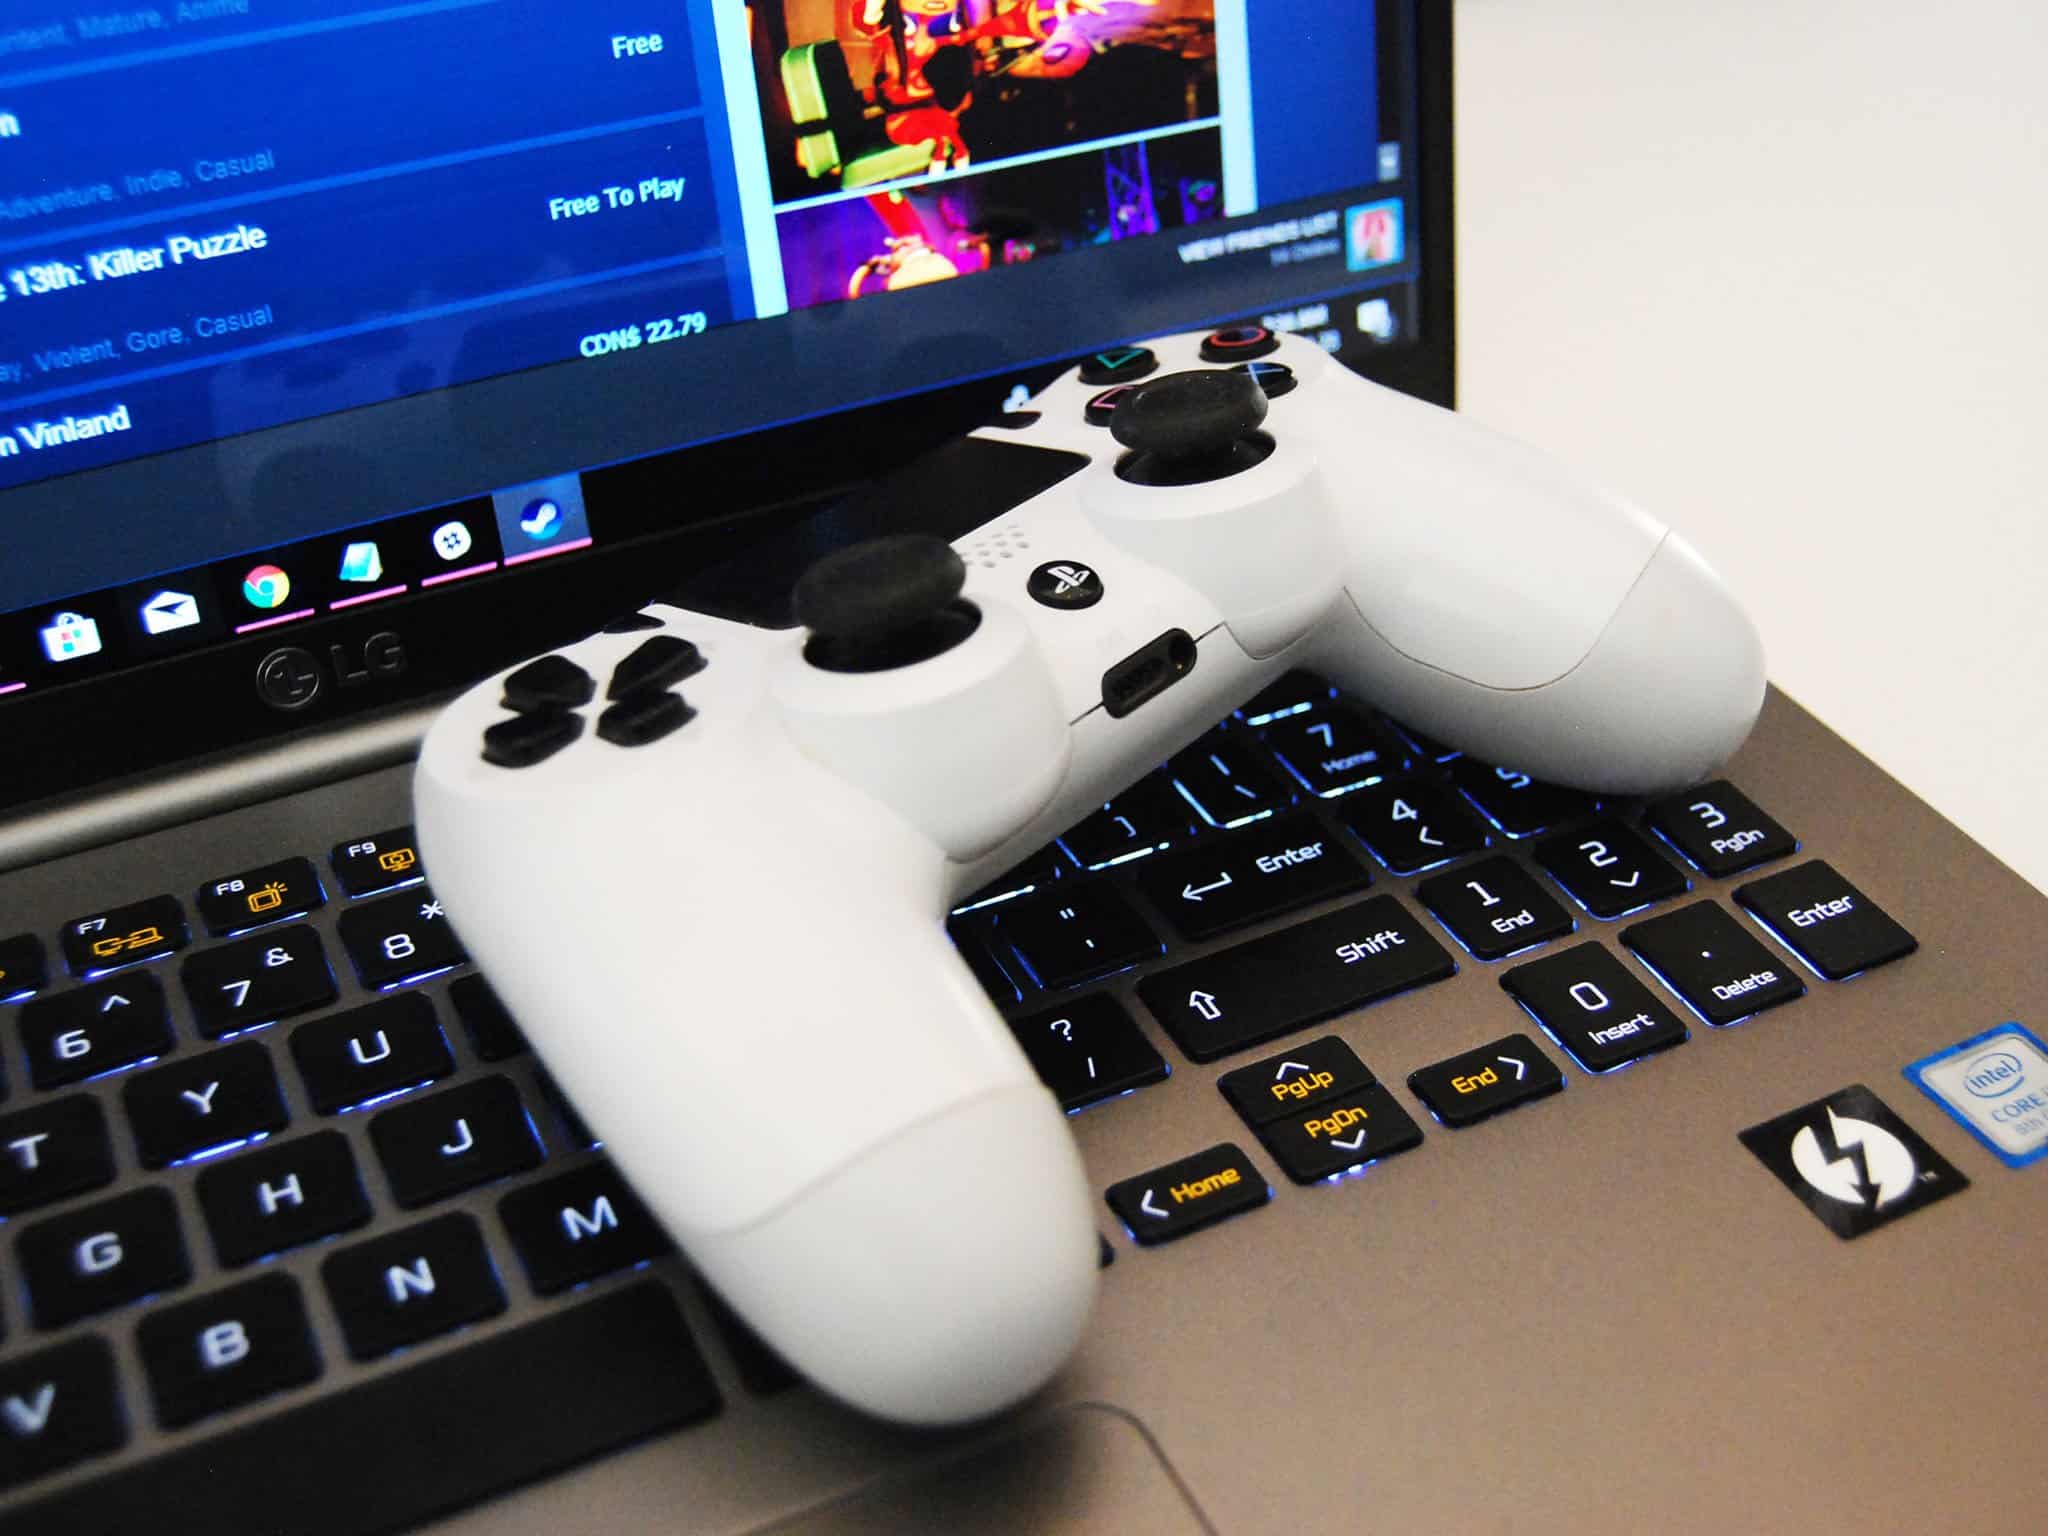 How to connect a PlayStation 4 controller to your PC